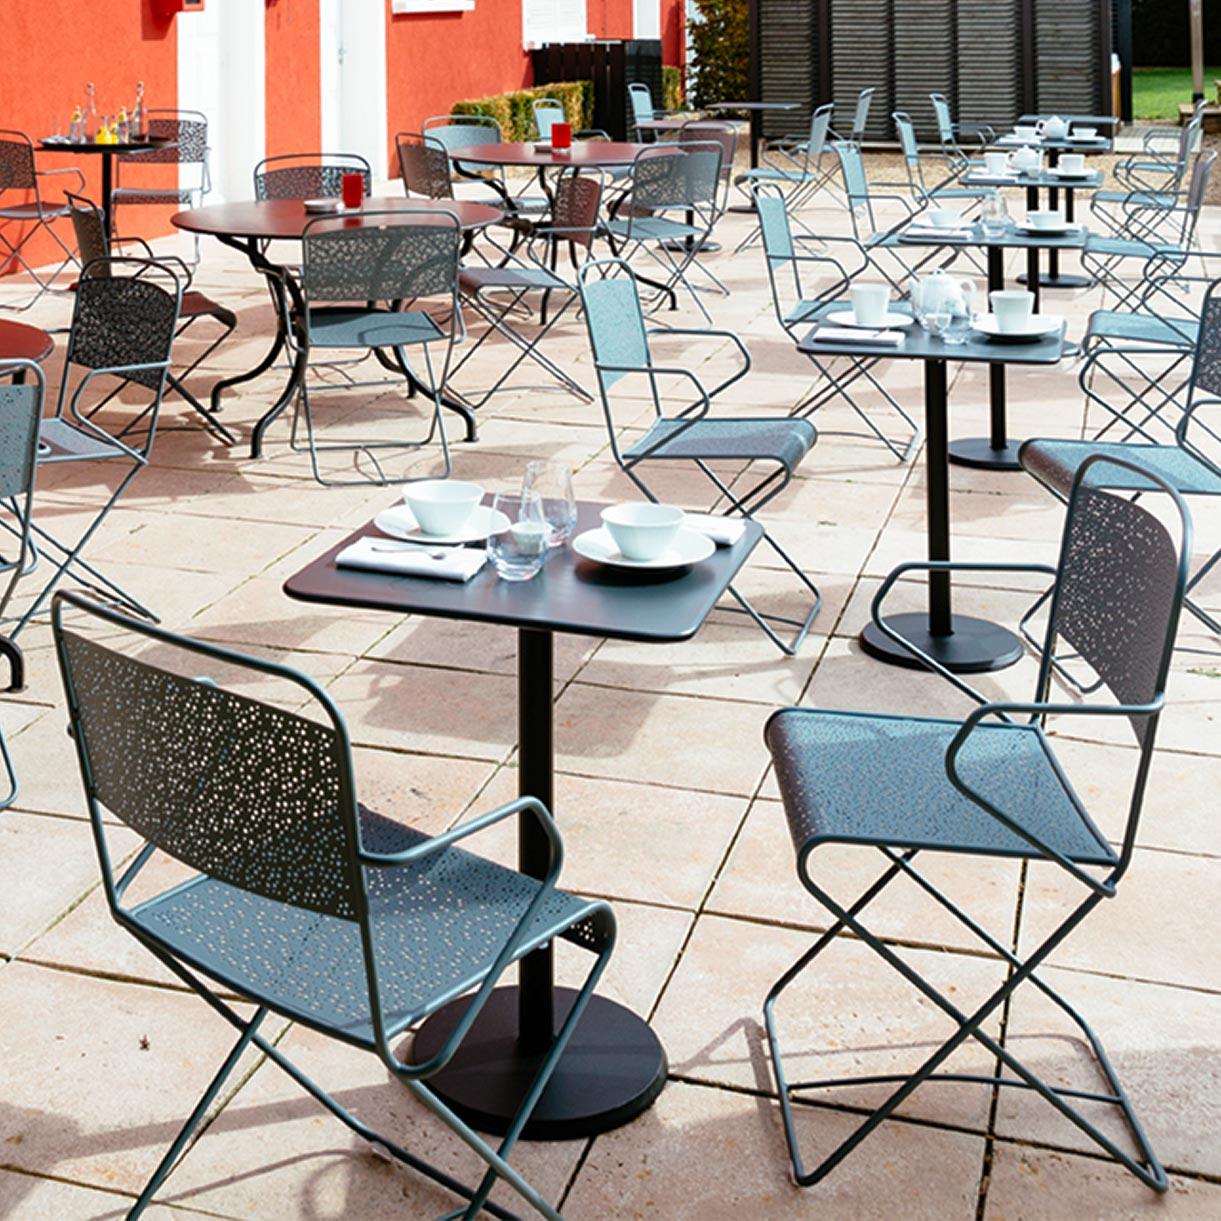 Buy Seville Chair — The Worm that Turned - revitalising your outdoor space